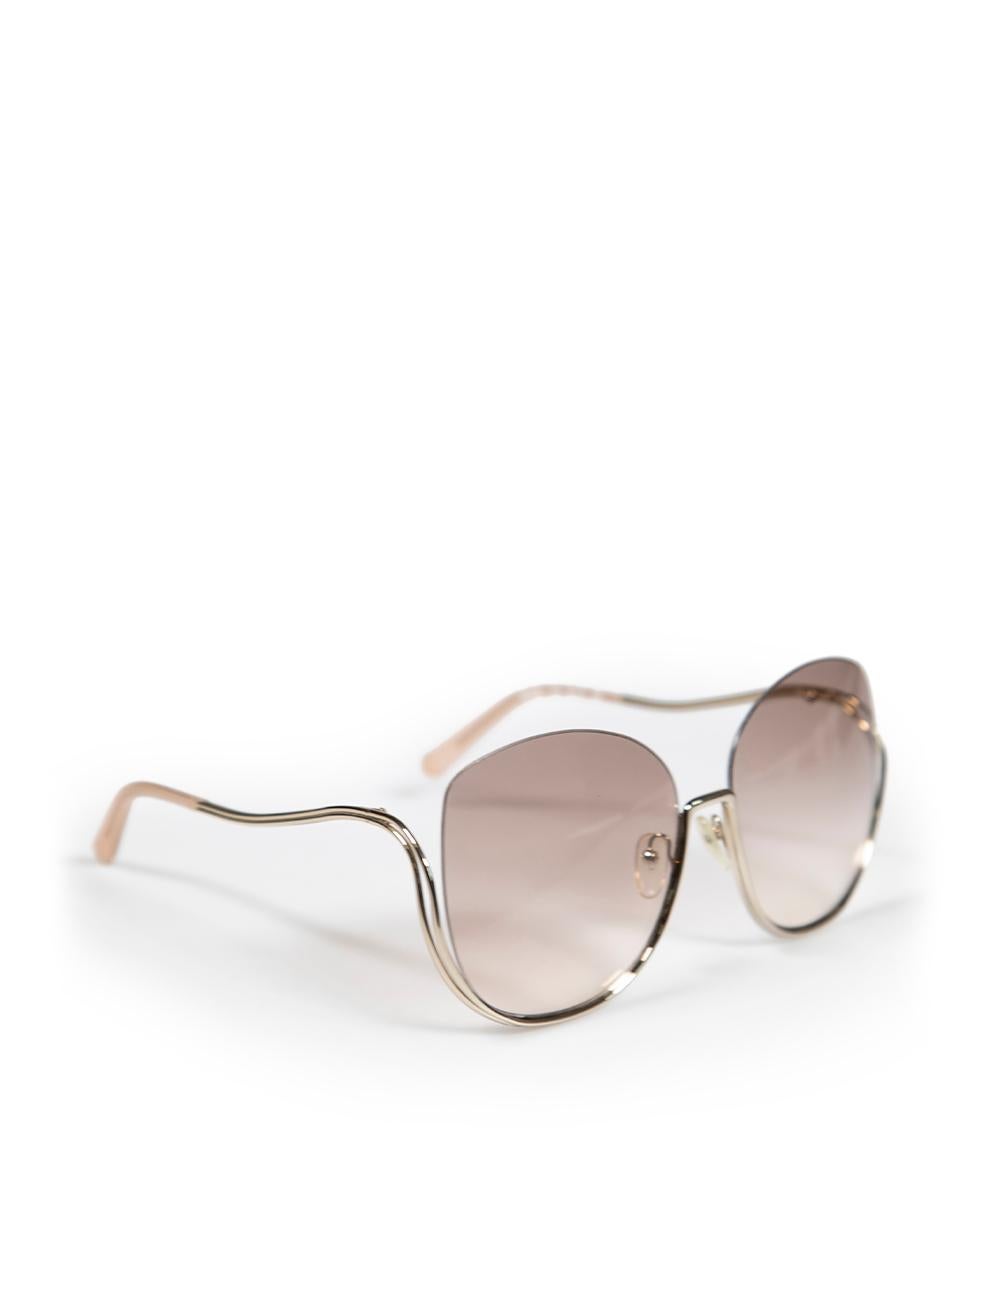 CONDITION is Very good. Hardly any visible wear to sunglasses is evident on this used Chloé designer resale item. These sunglasses come with original case and box.
 
 
 
 Details
 
 
 Silver
 
 Metal
 
 Sunglasses
 
 Round frame
 
 Gradient brown